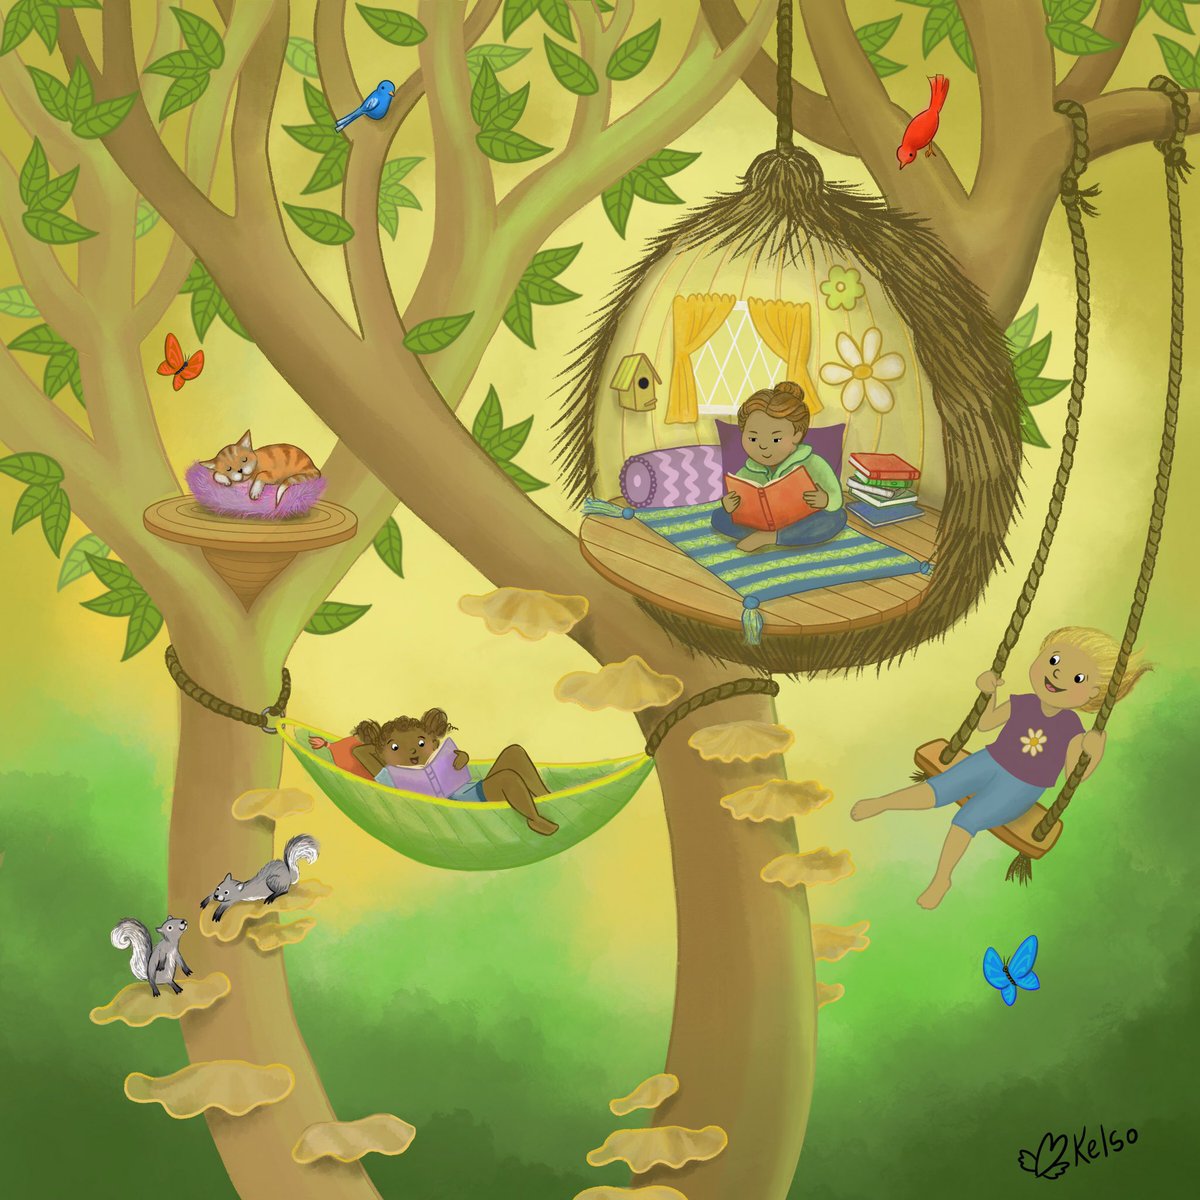 My SCBWI Draw This! entry for July. Treehouse. #scbwidrawthis